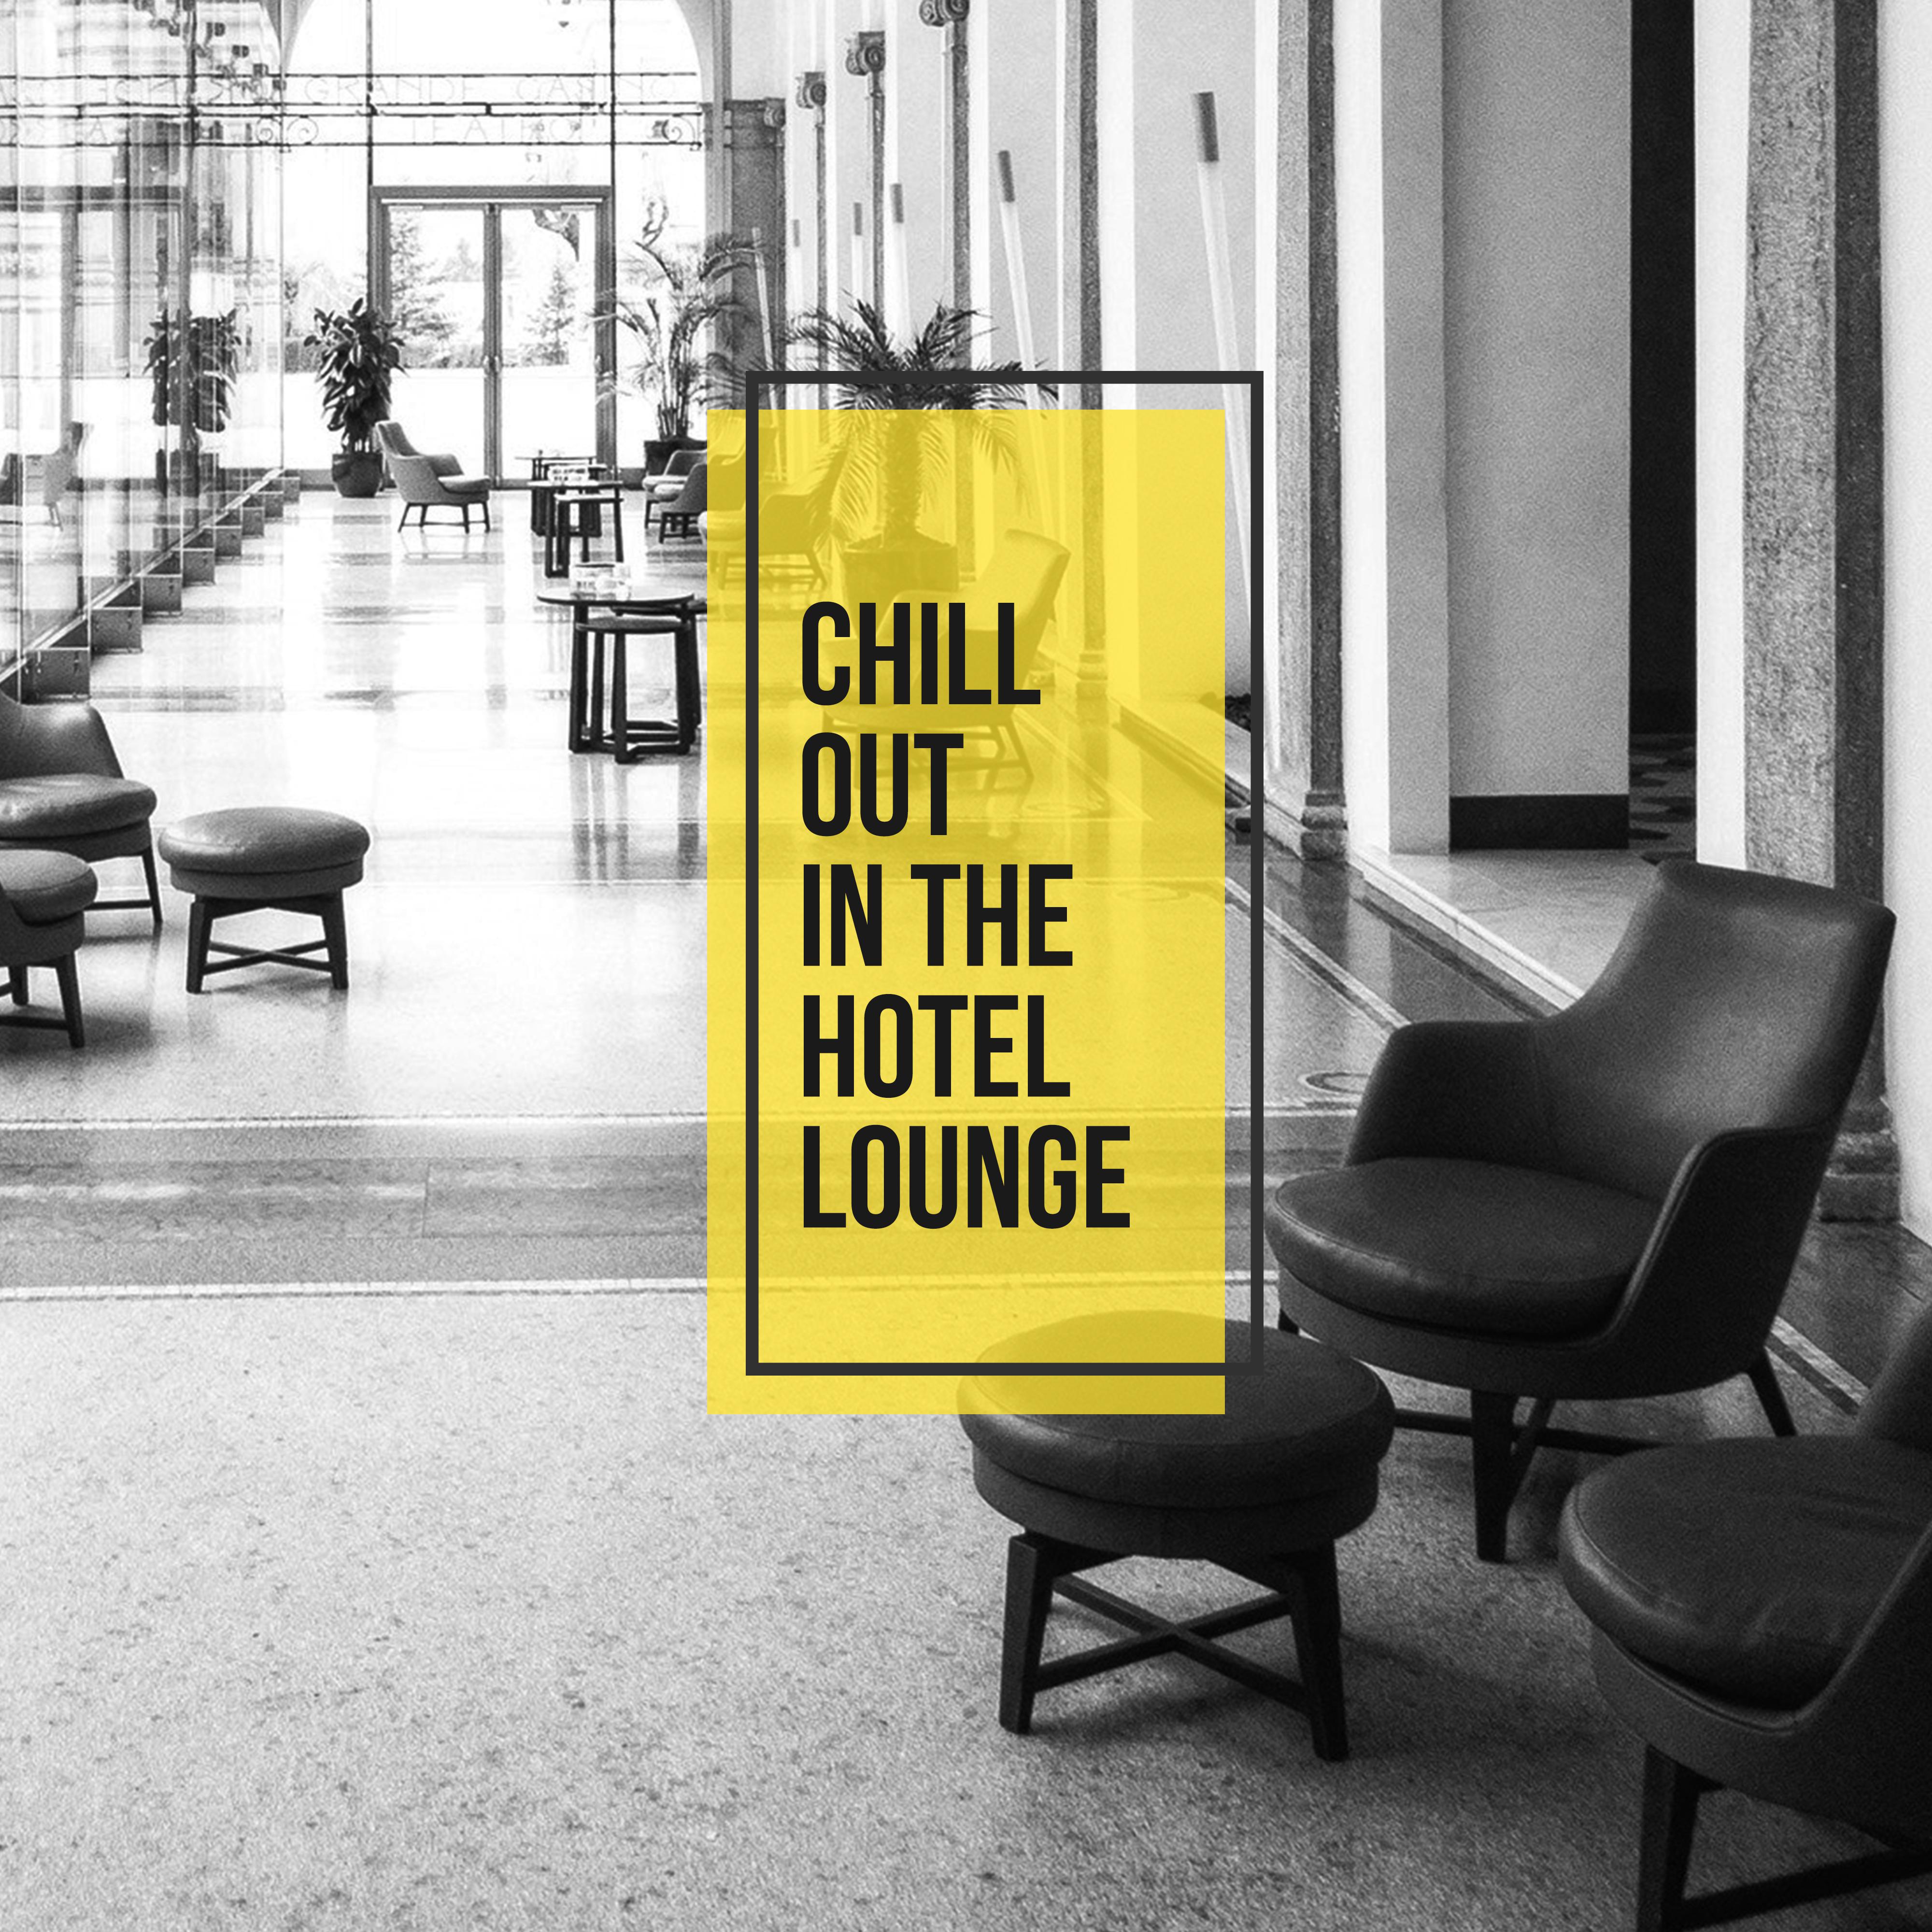 Chill Out in the Hotel Lounge